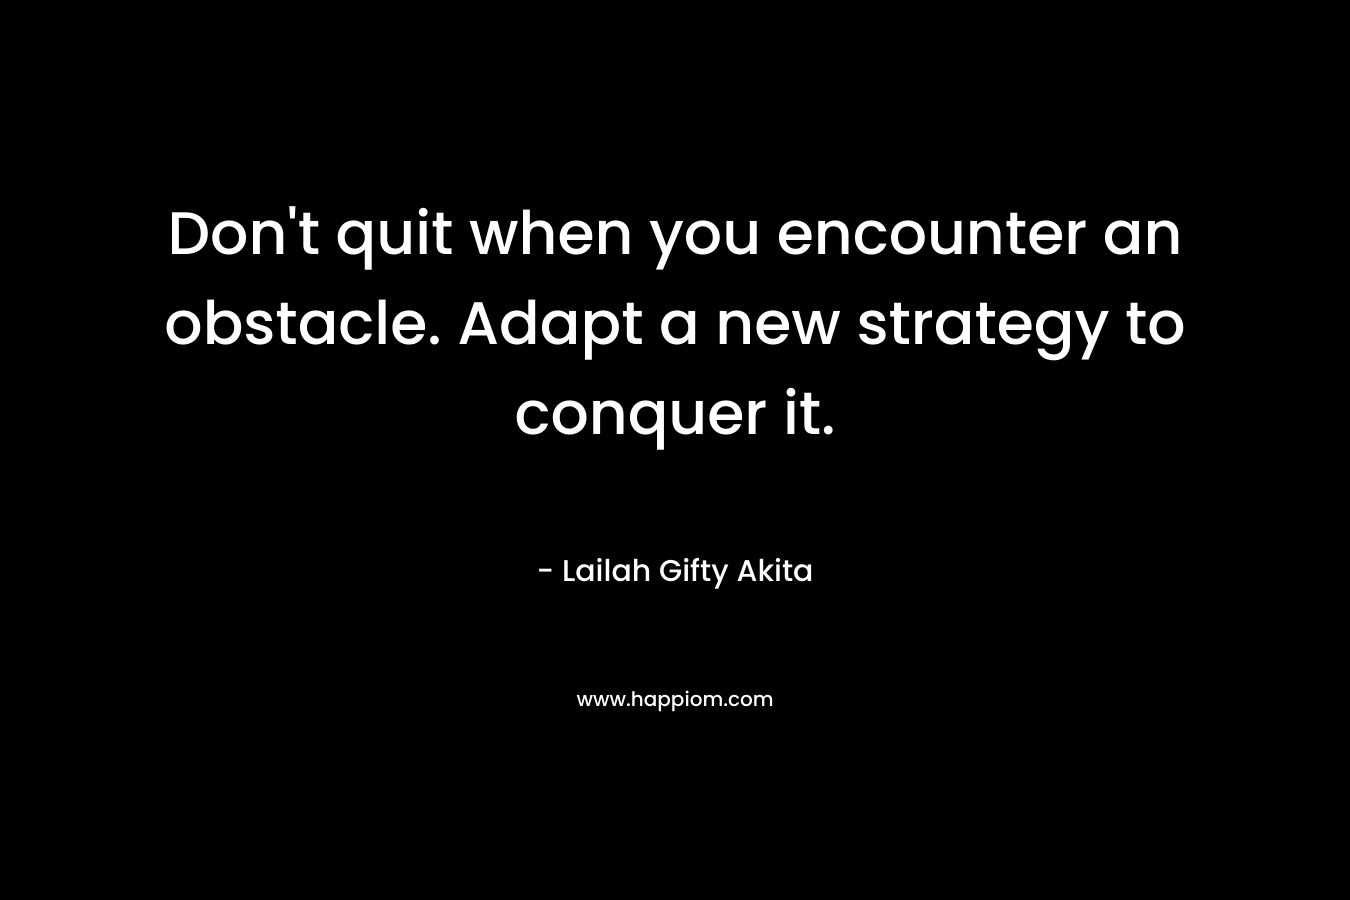 Don’t quit when you encounter an obstacle. Adapt a new strategy to conquer it. – Lailah Gifty Akita